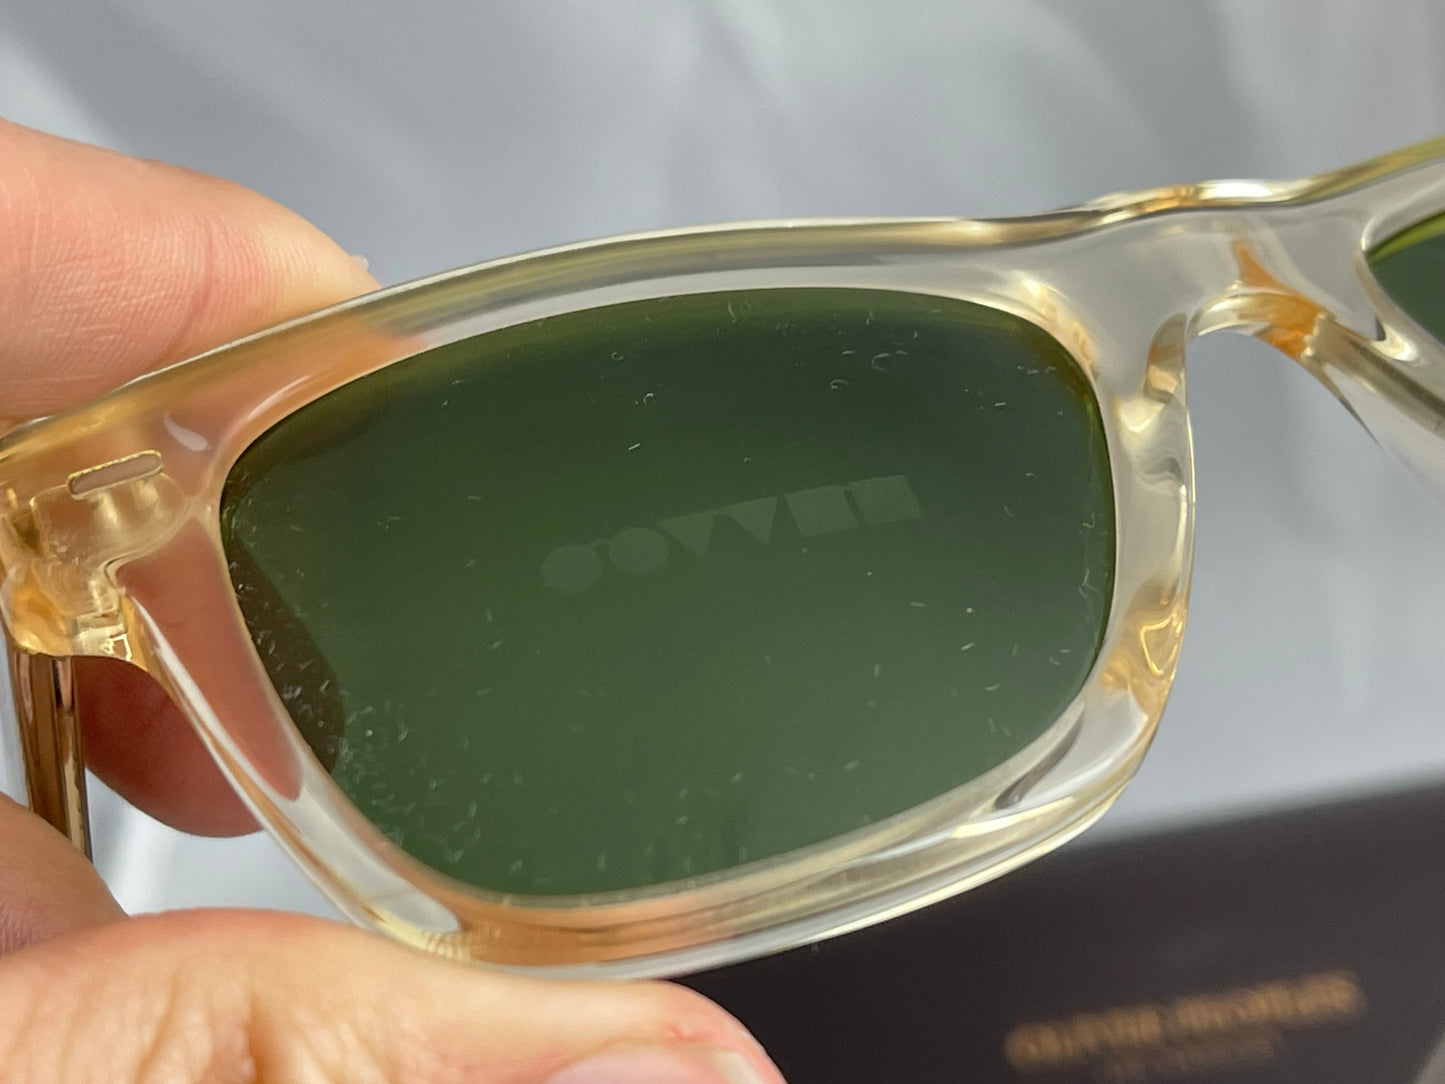 New Oliver Peoples Oliver Sun OV 5393SU 109452 Buff / Green Glass lenses 51mm